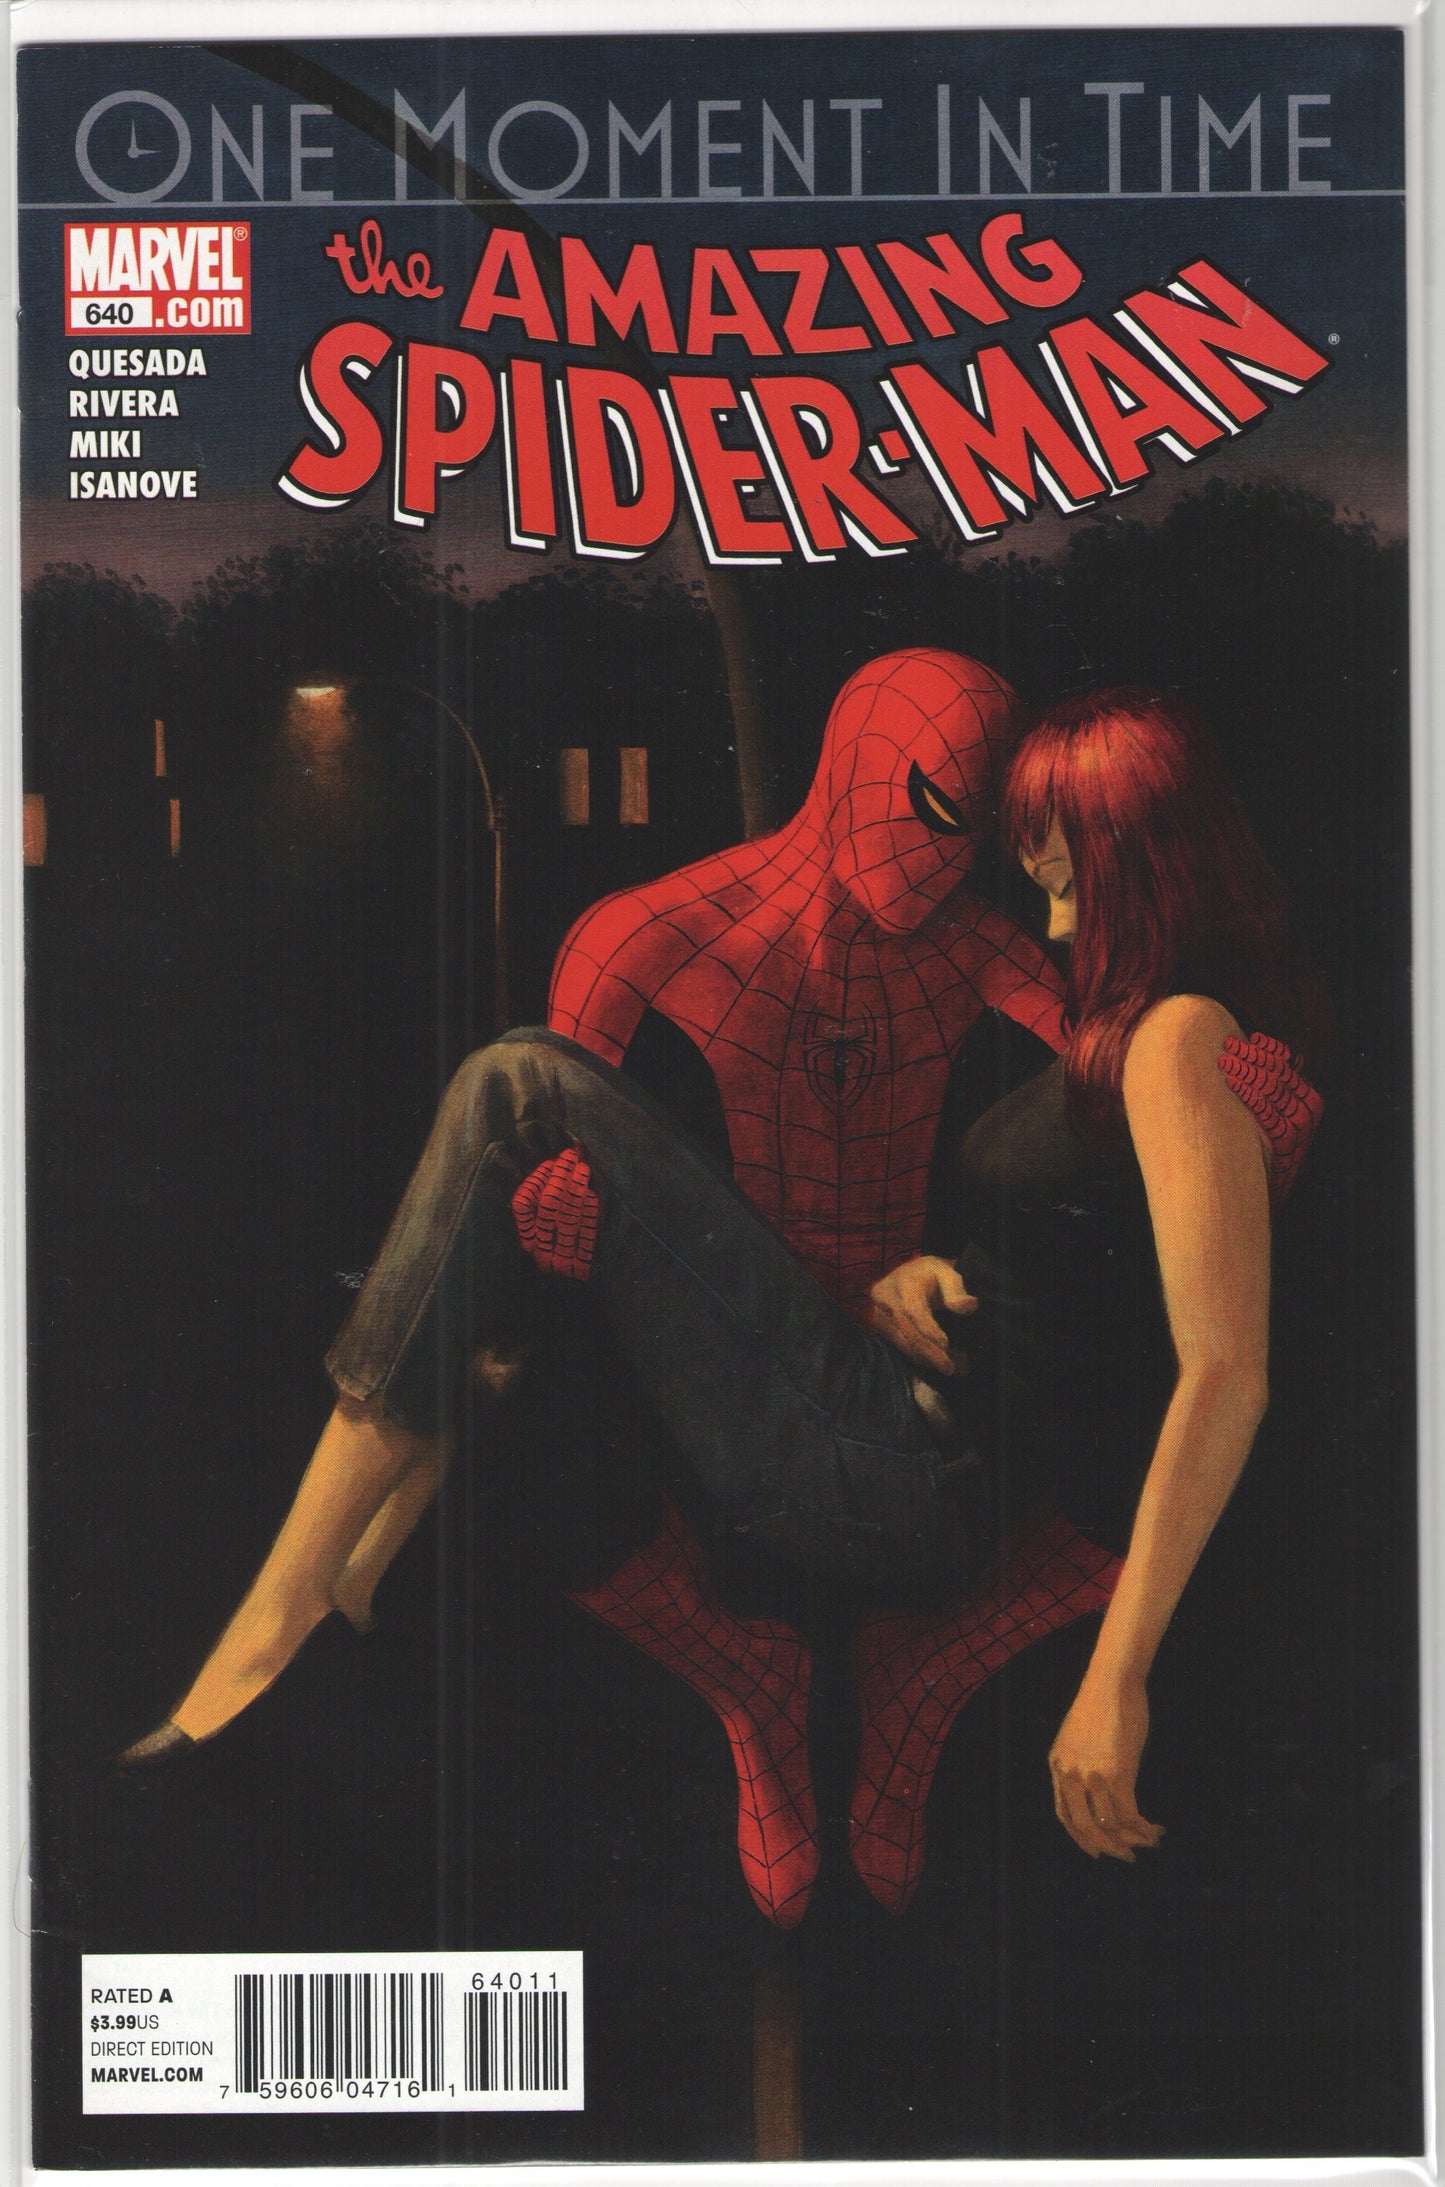 Amazing Spider-Man "One Moment in Time" Complete Story Arc #638-641 (2010)